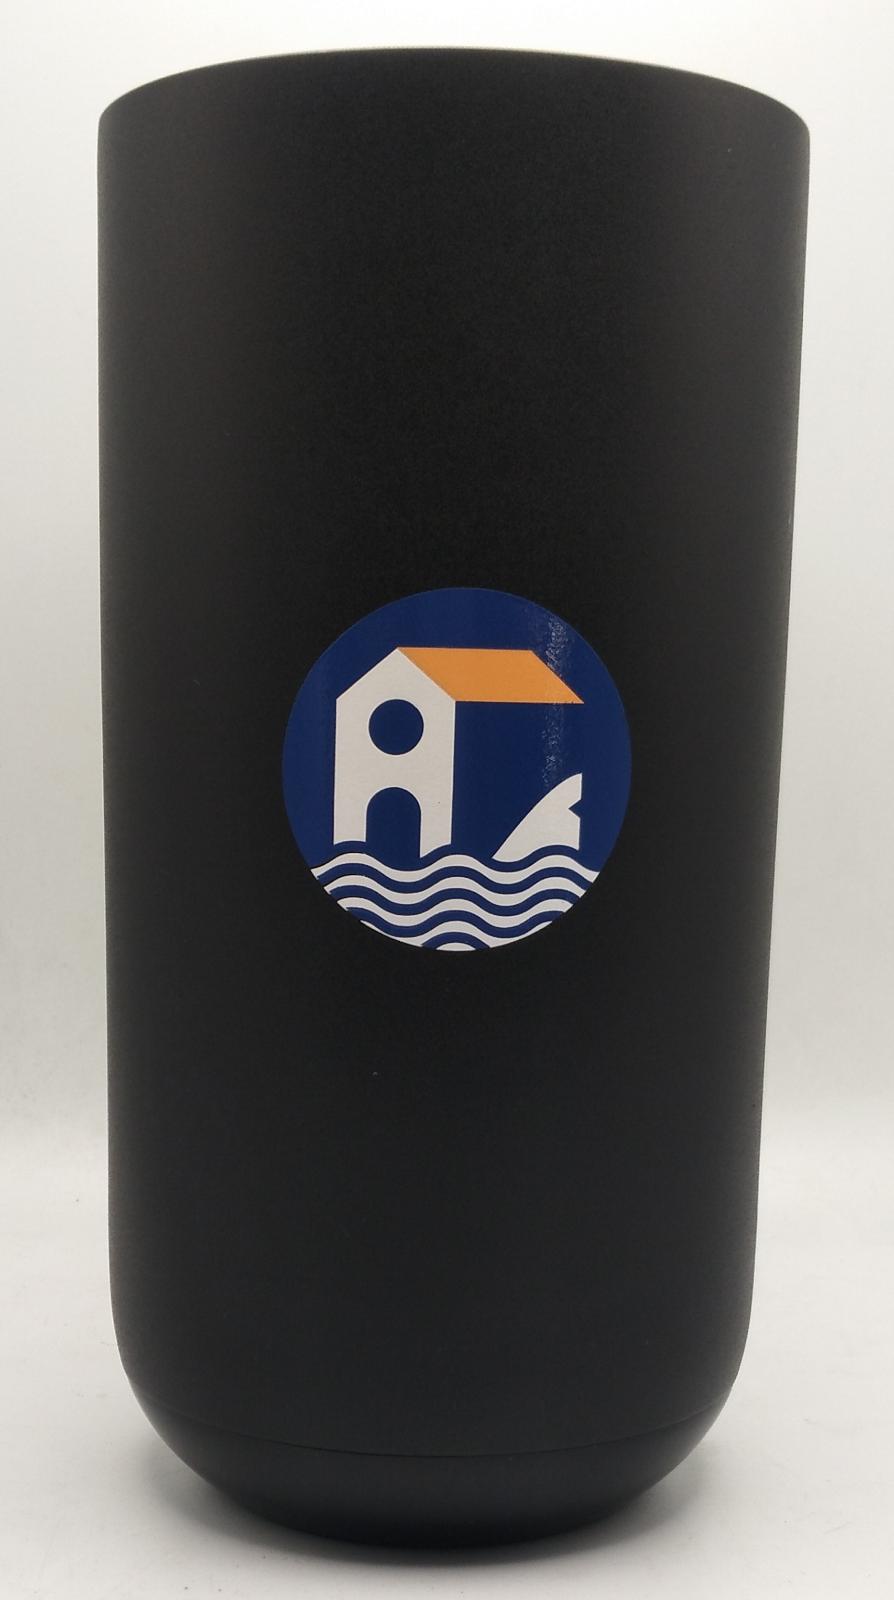 Customizable Ember Mugs Printed with your Company logo or brand name